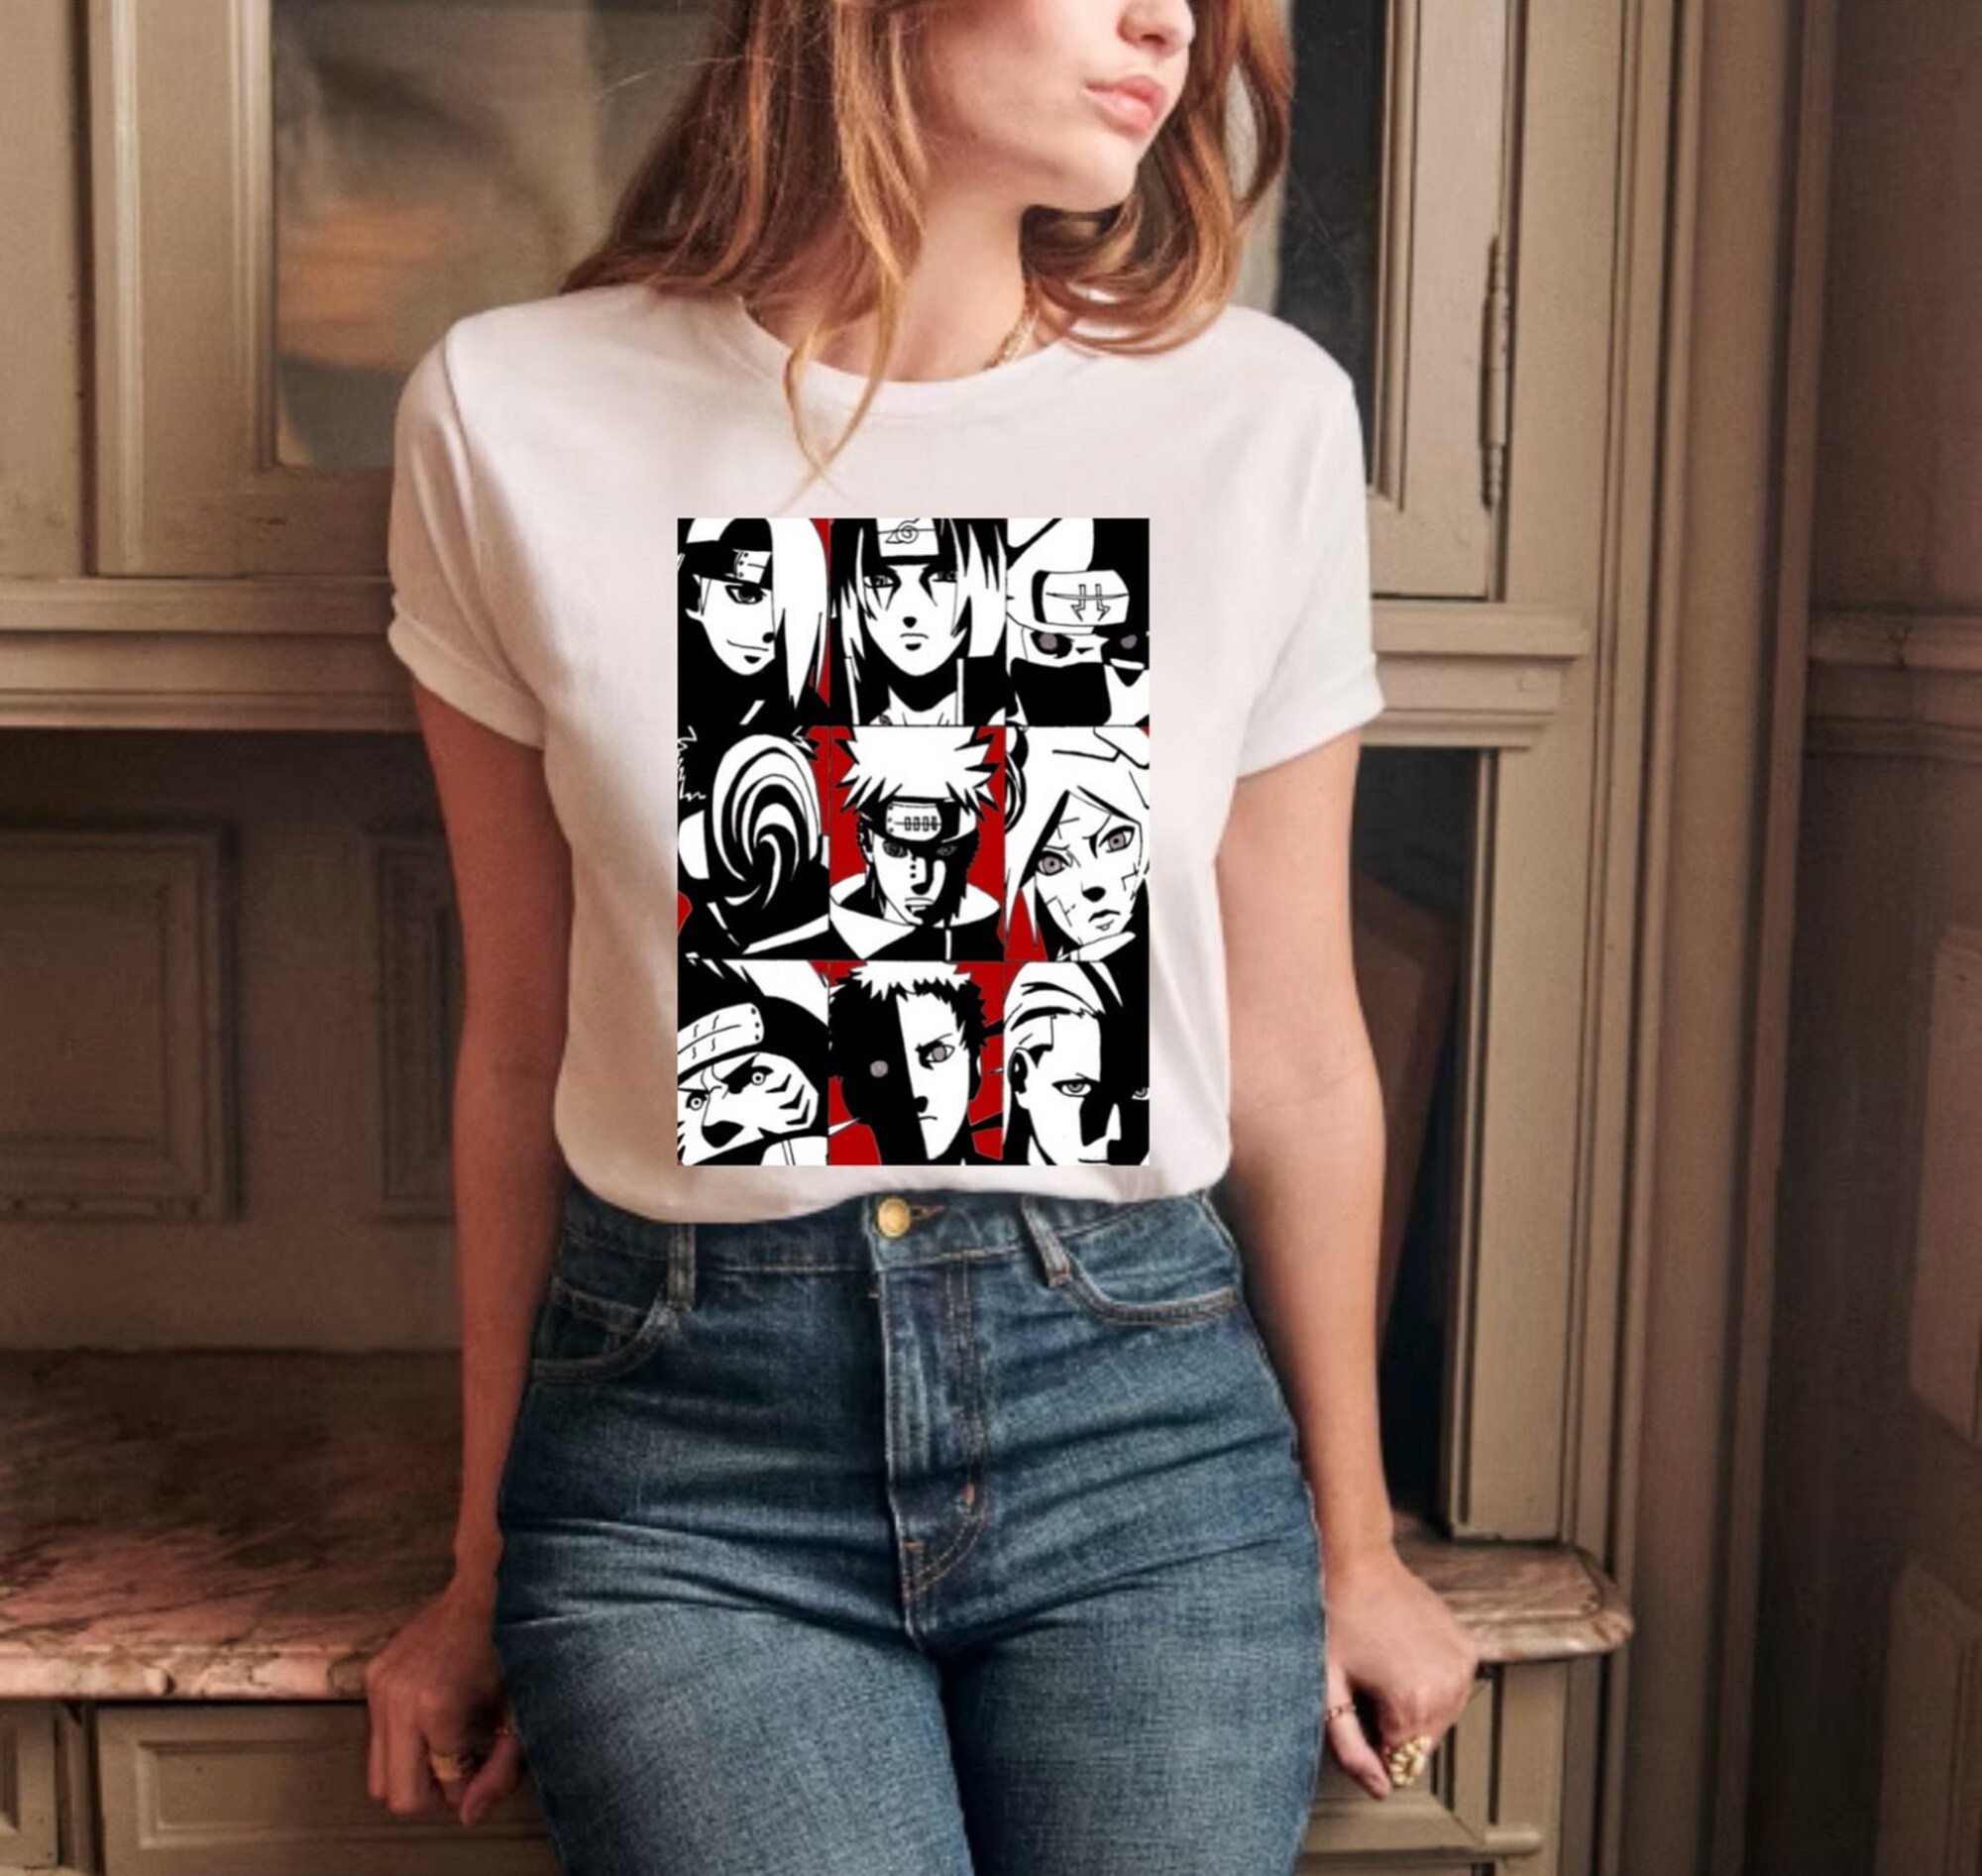 Discover Anime Vintage Style T-Shirts